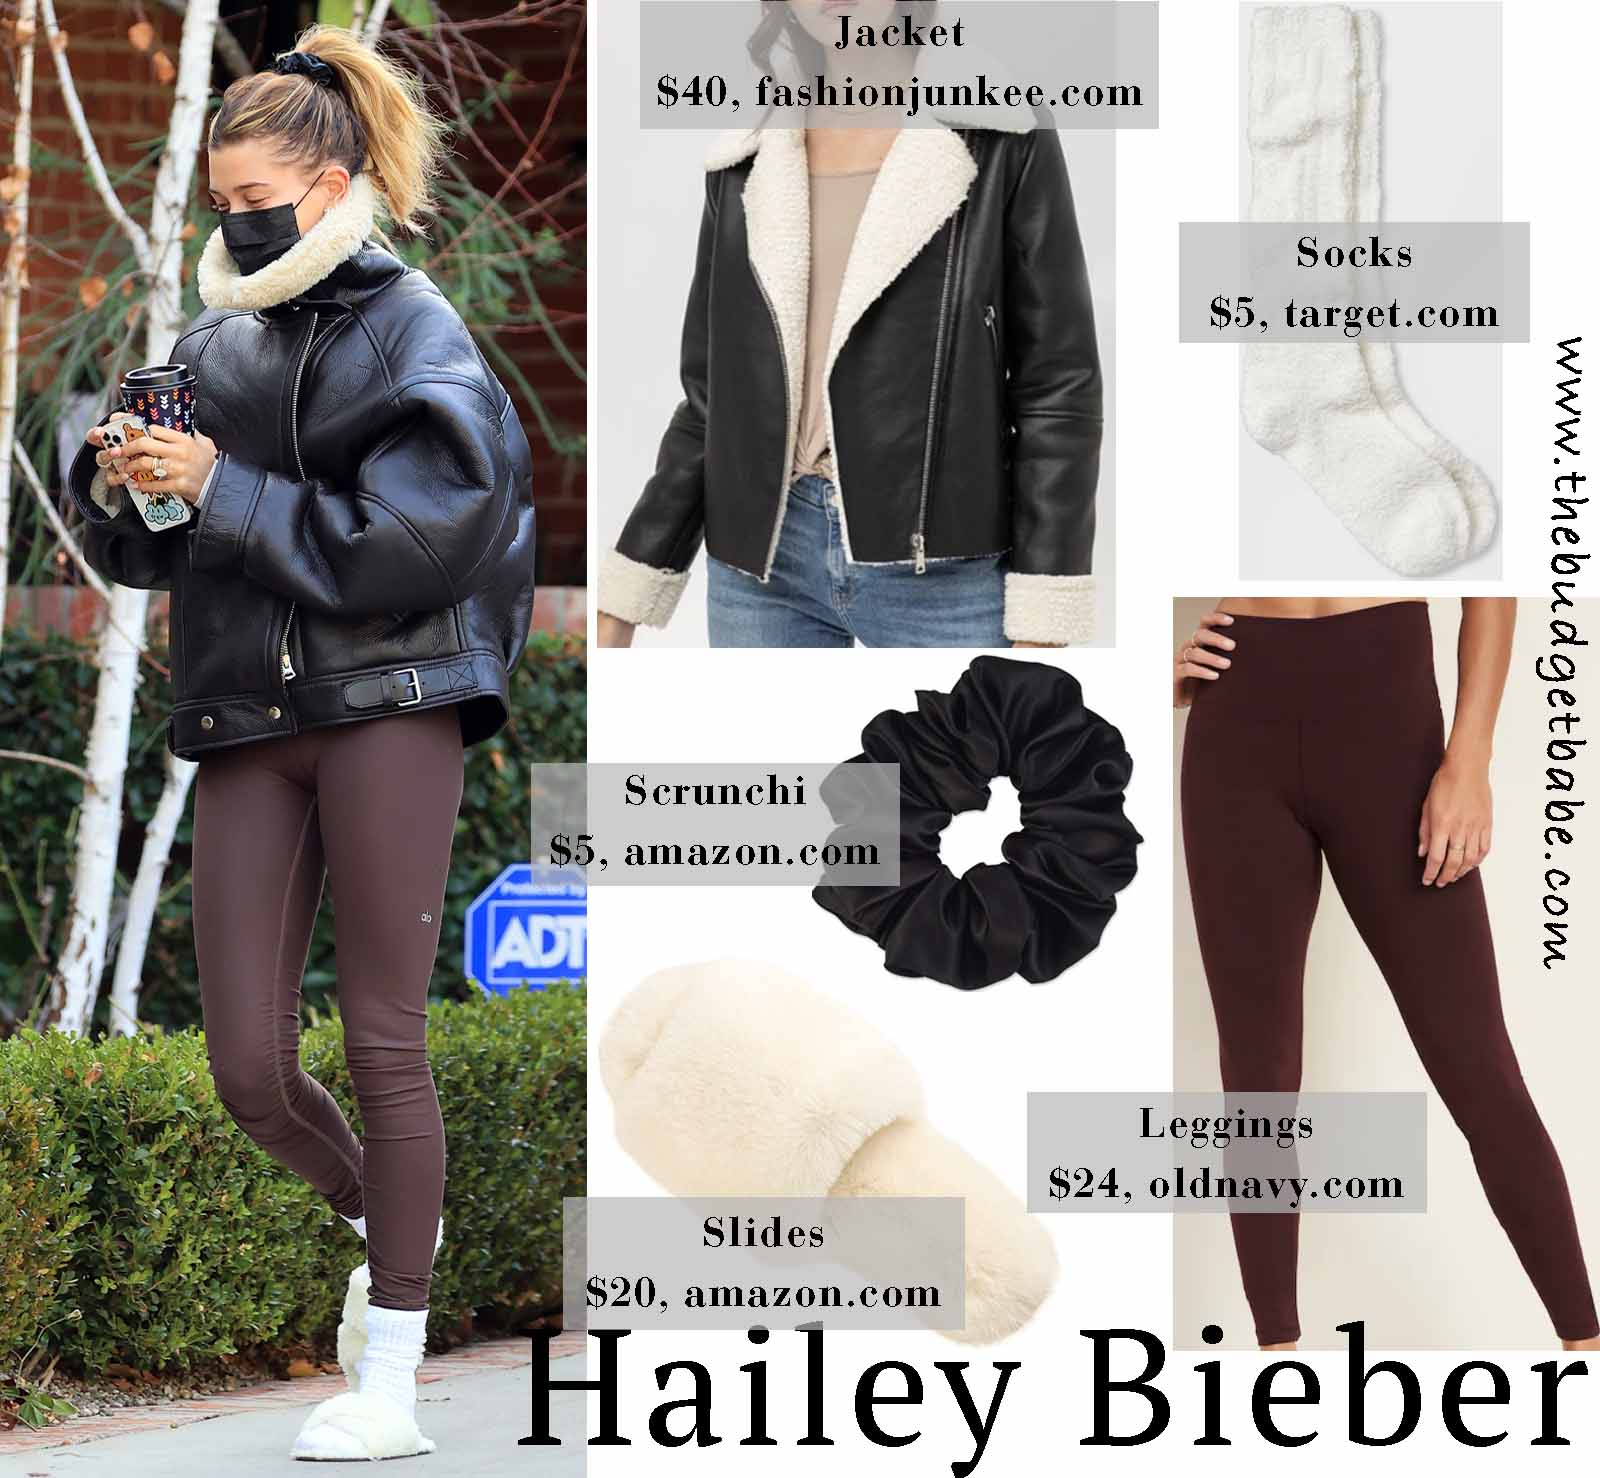 Hailey's jacket is our new favorite!